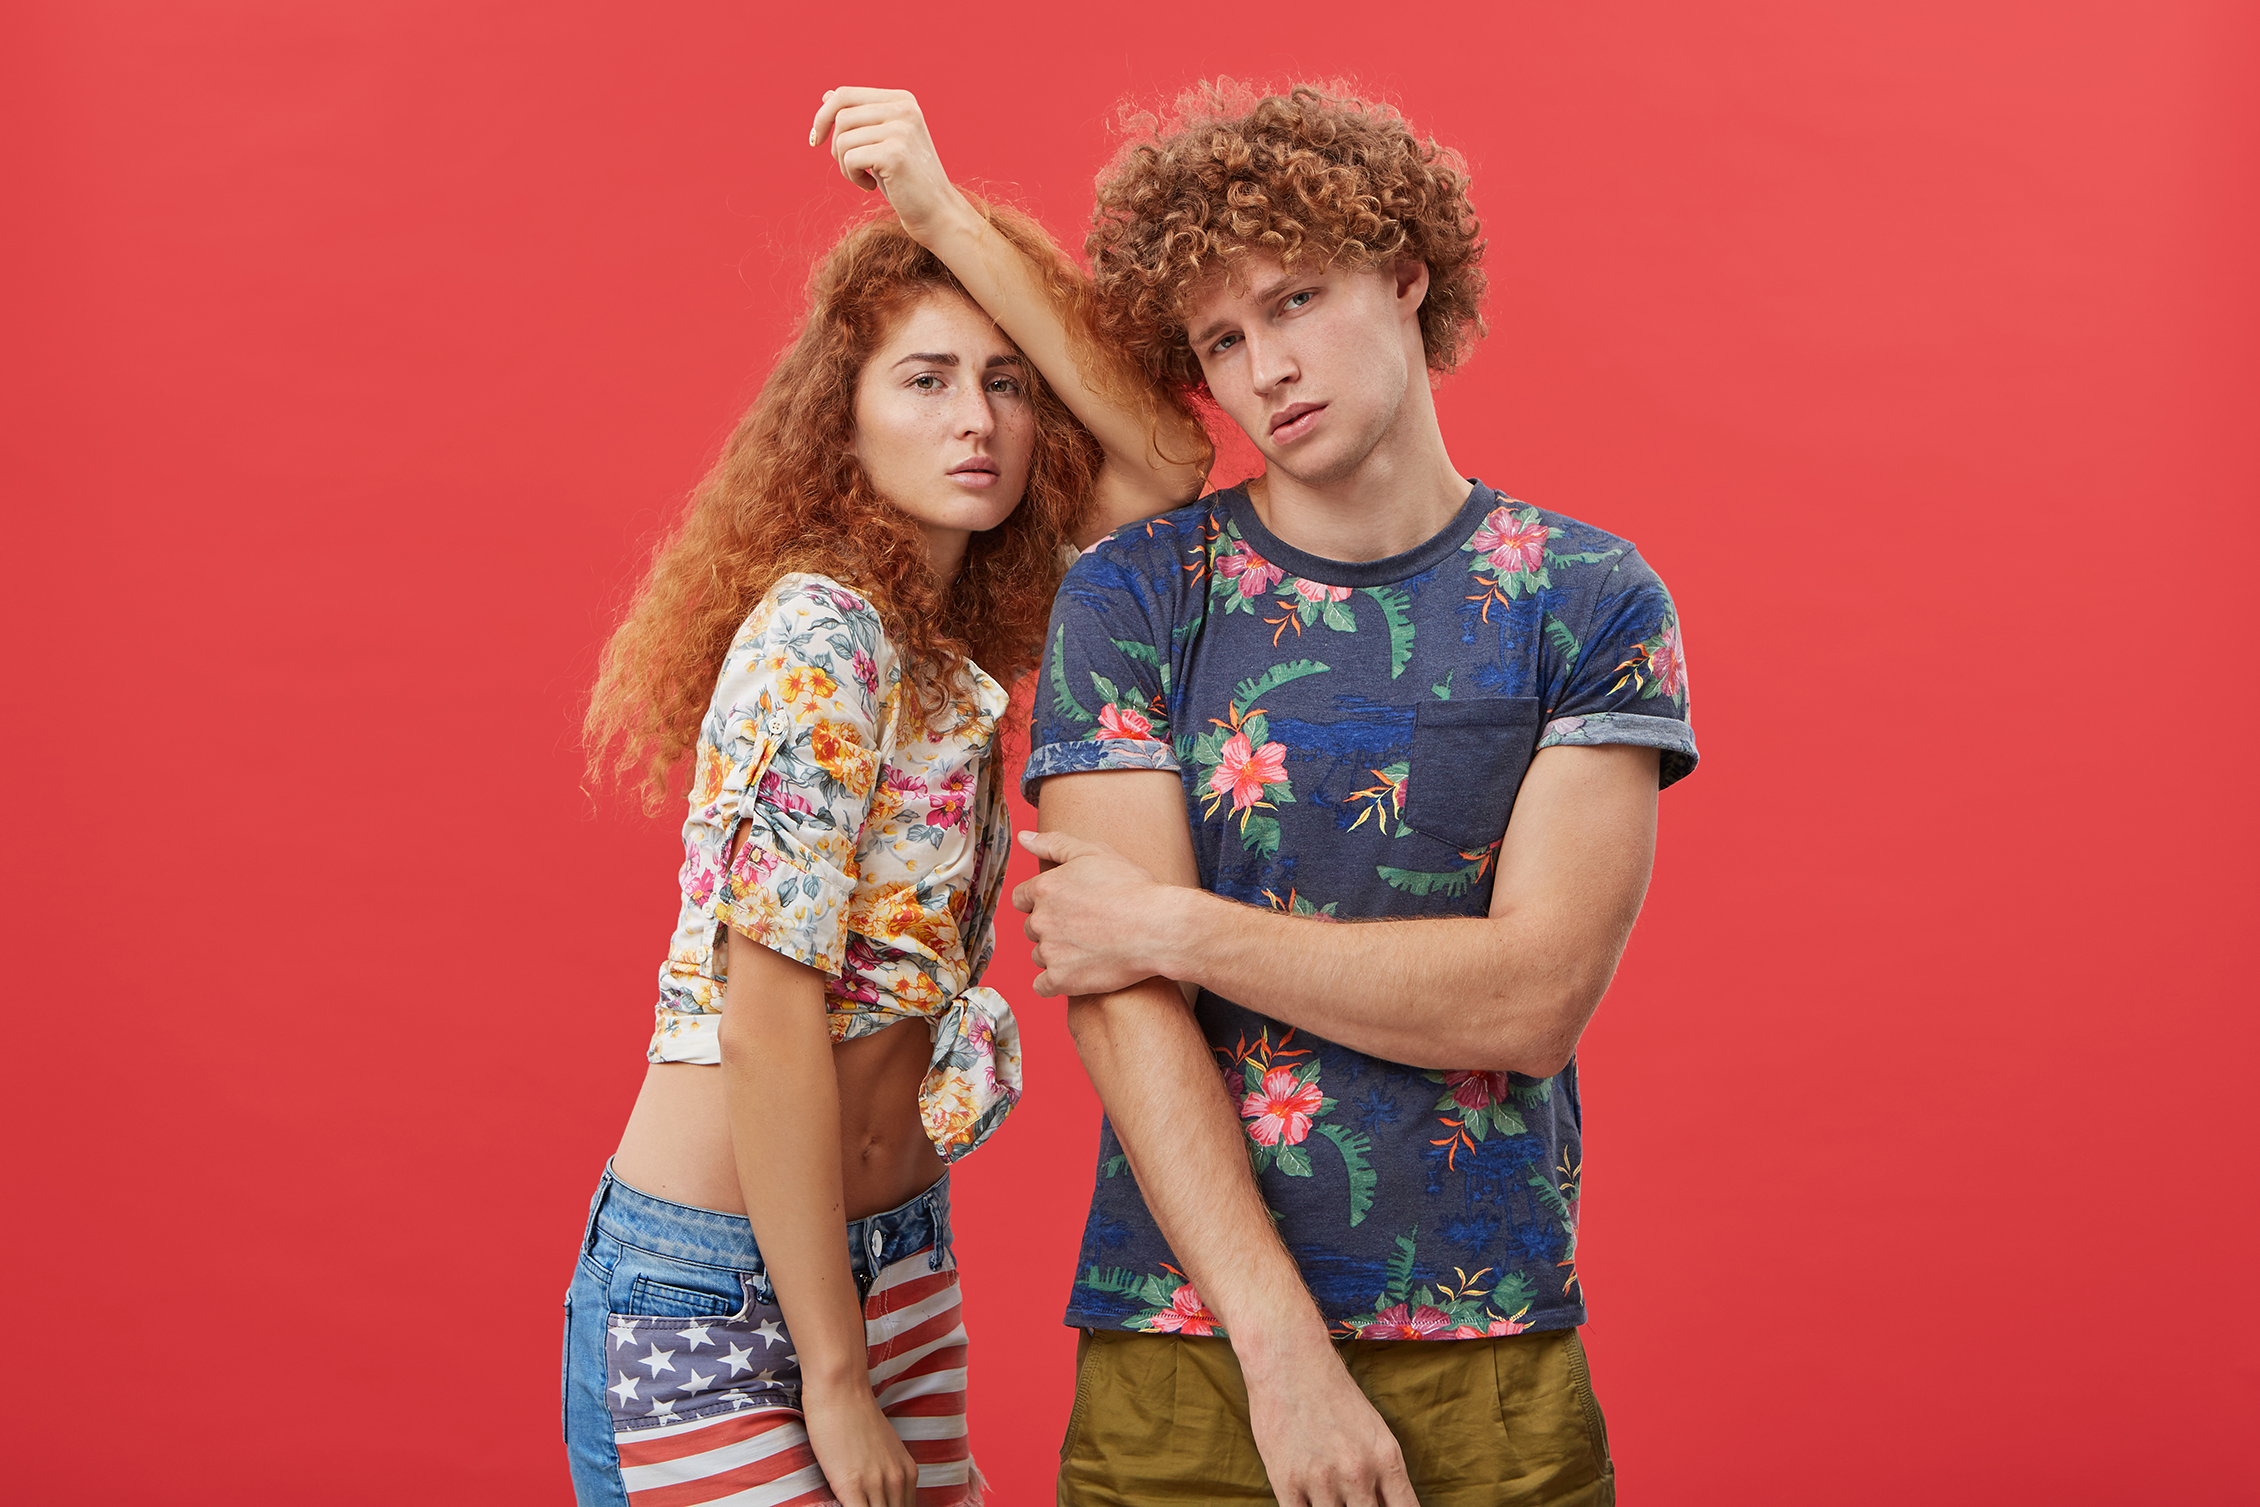 Beautiful woman with red hair and freckles wearing shirt and shorts leaning at shoulder of her curly boyfriend who is posing looking directly into camera with serious expression. Two best friends